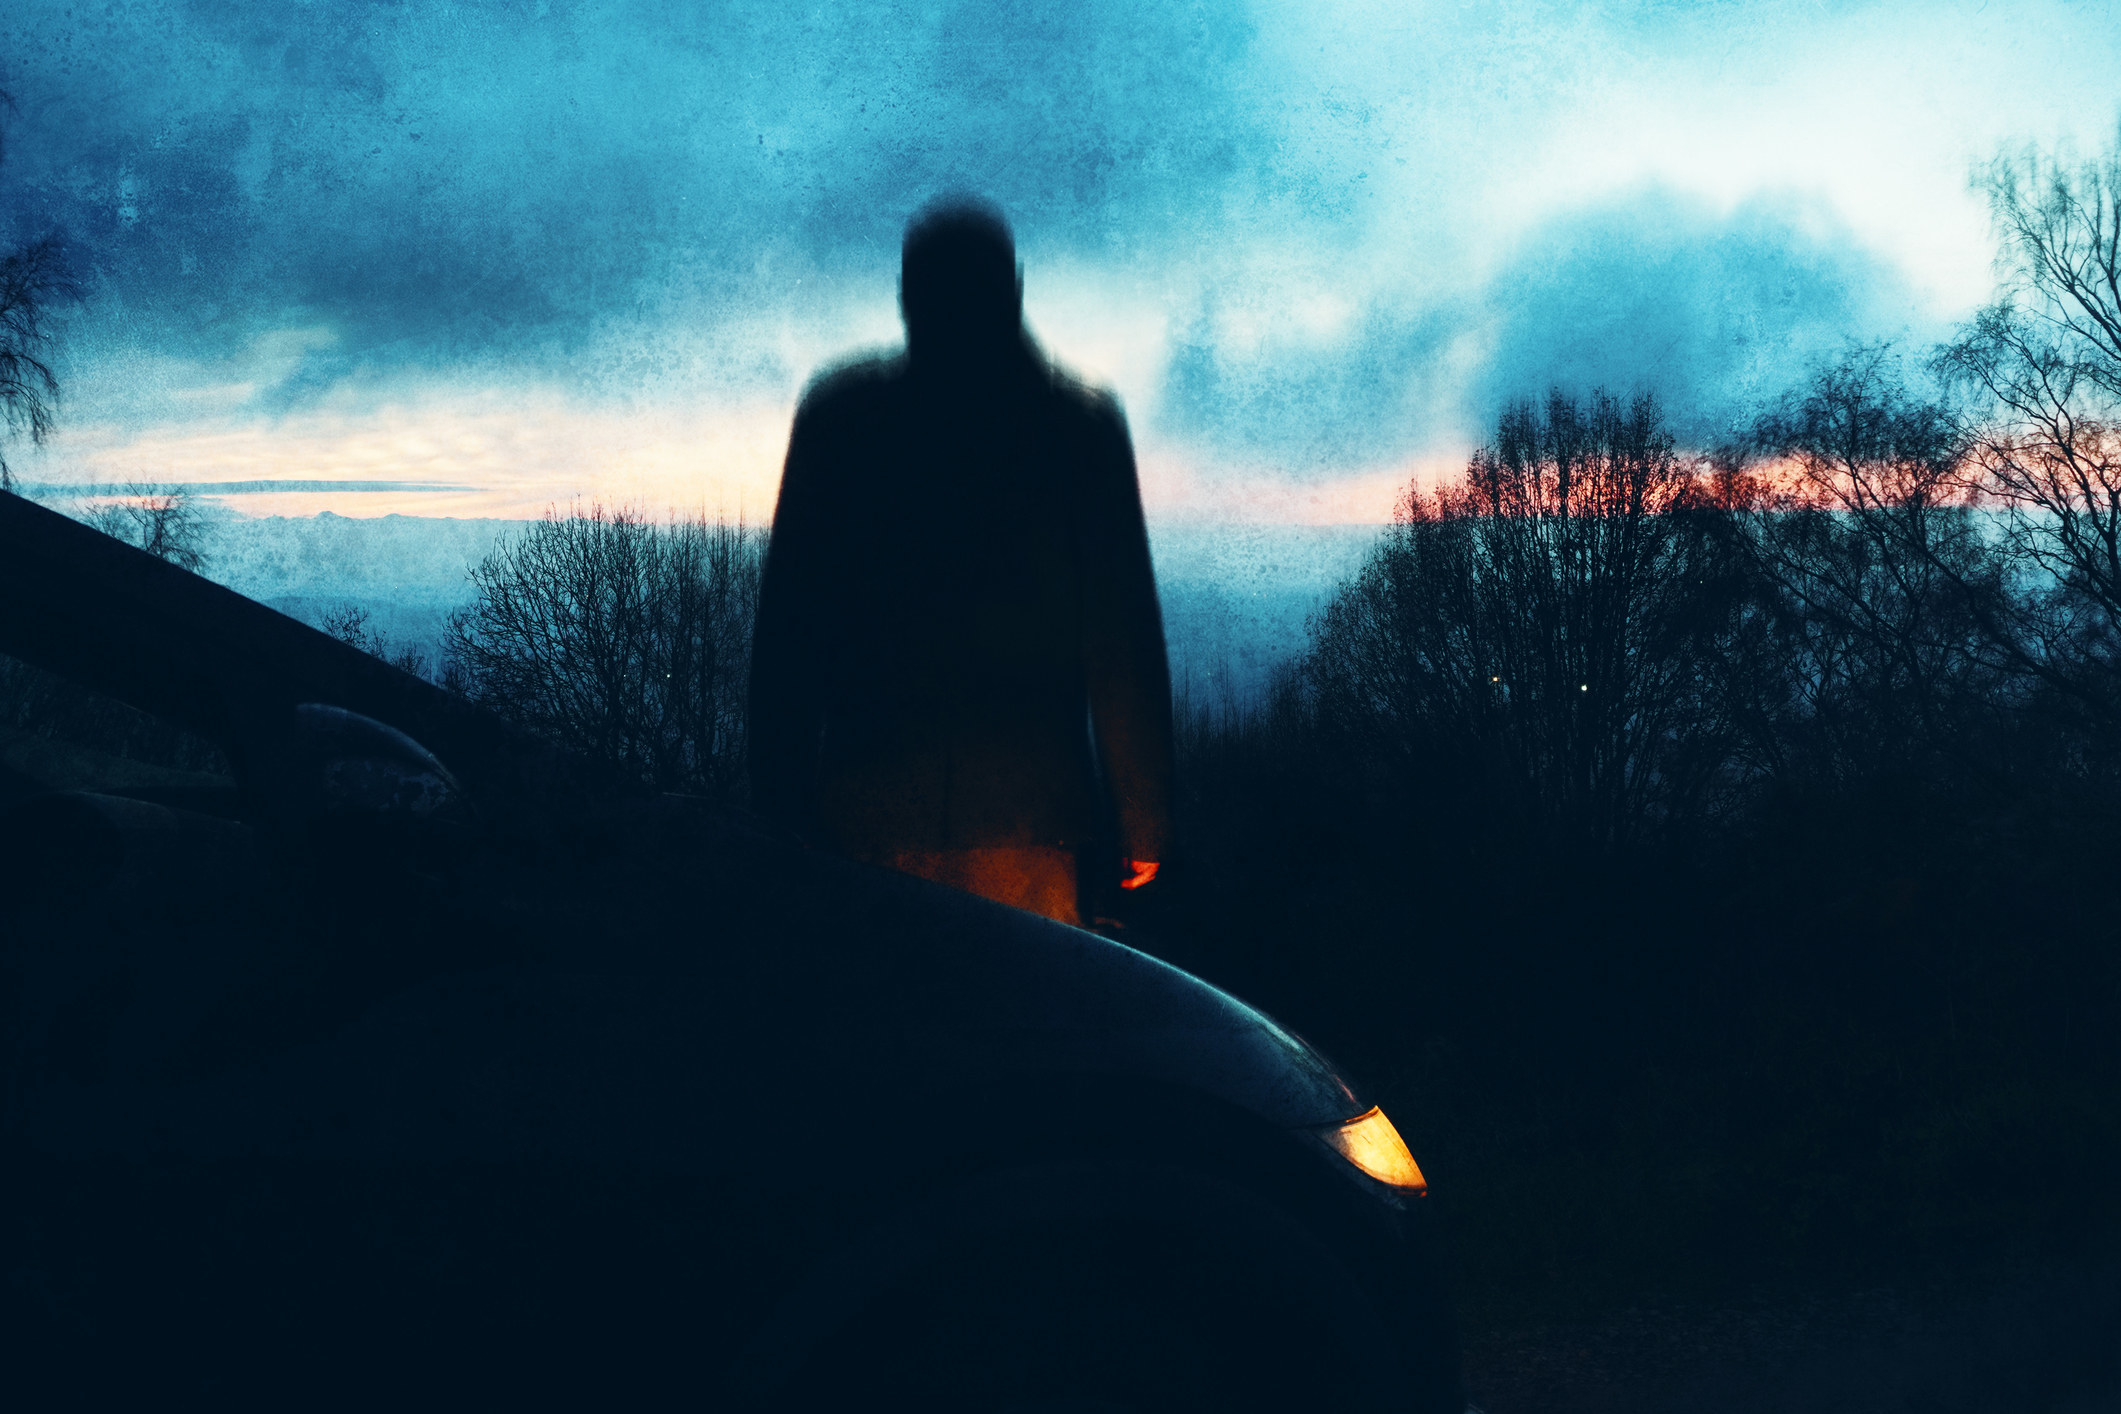 A silhouette of man standing next to a car during the early hours of the day